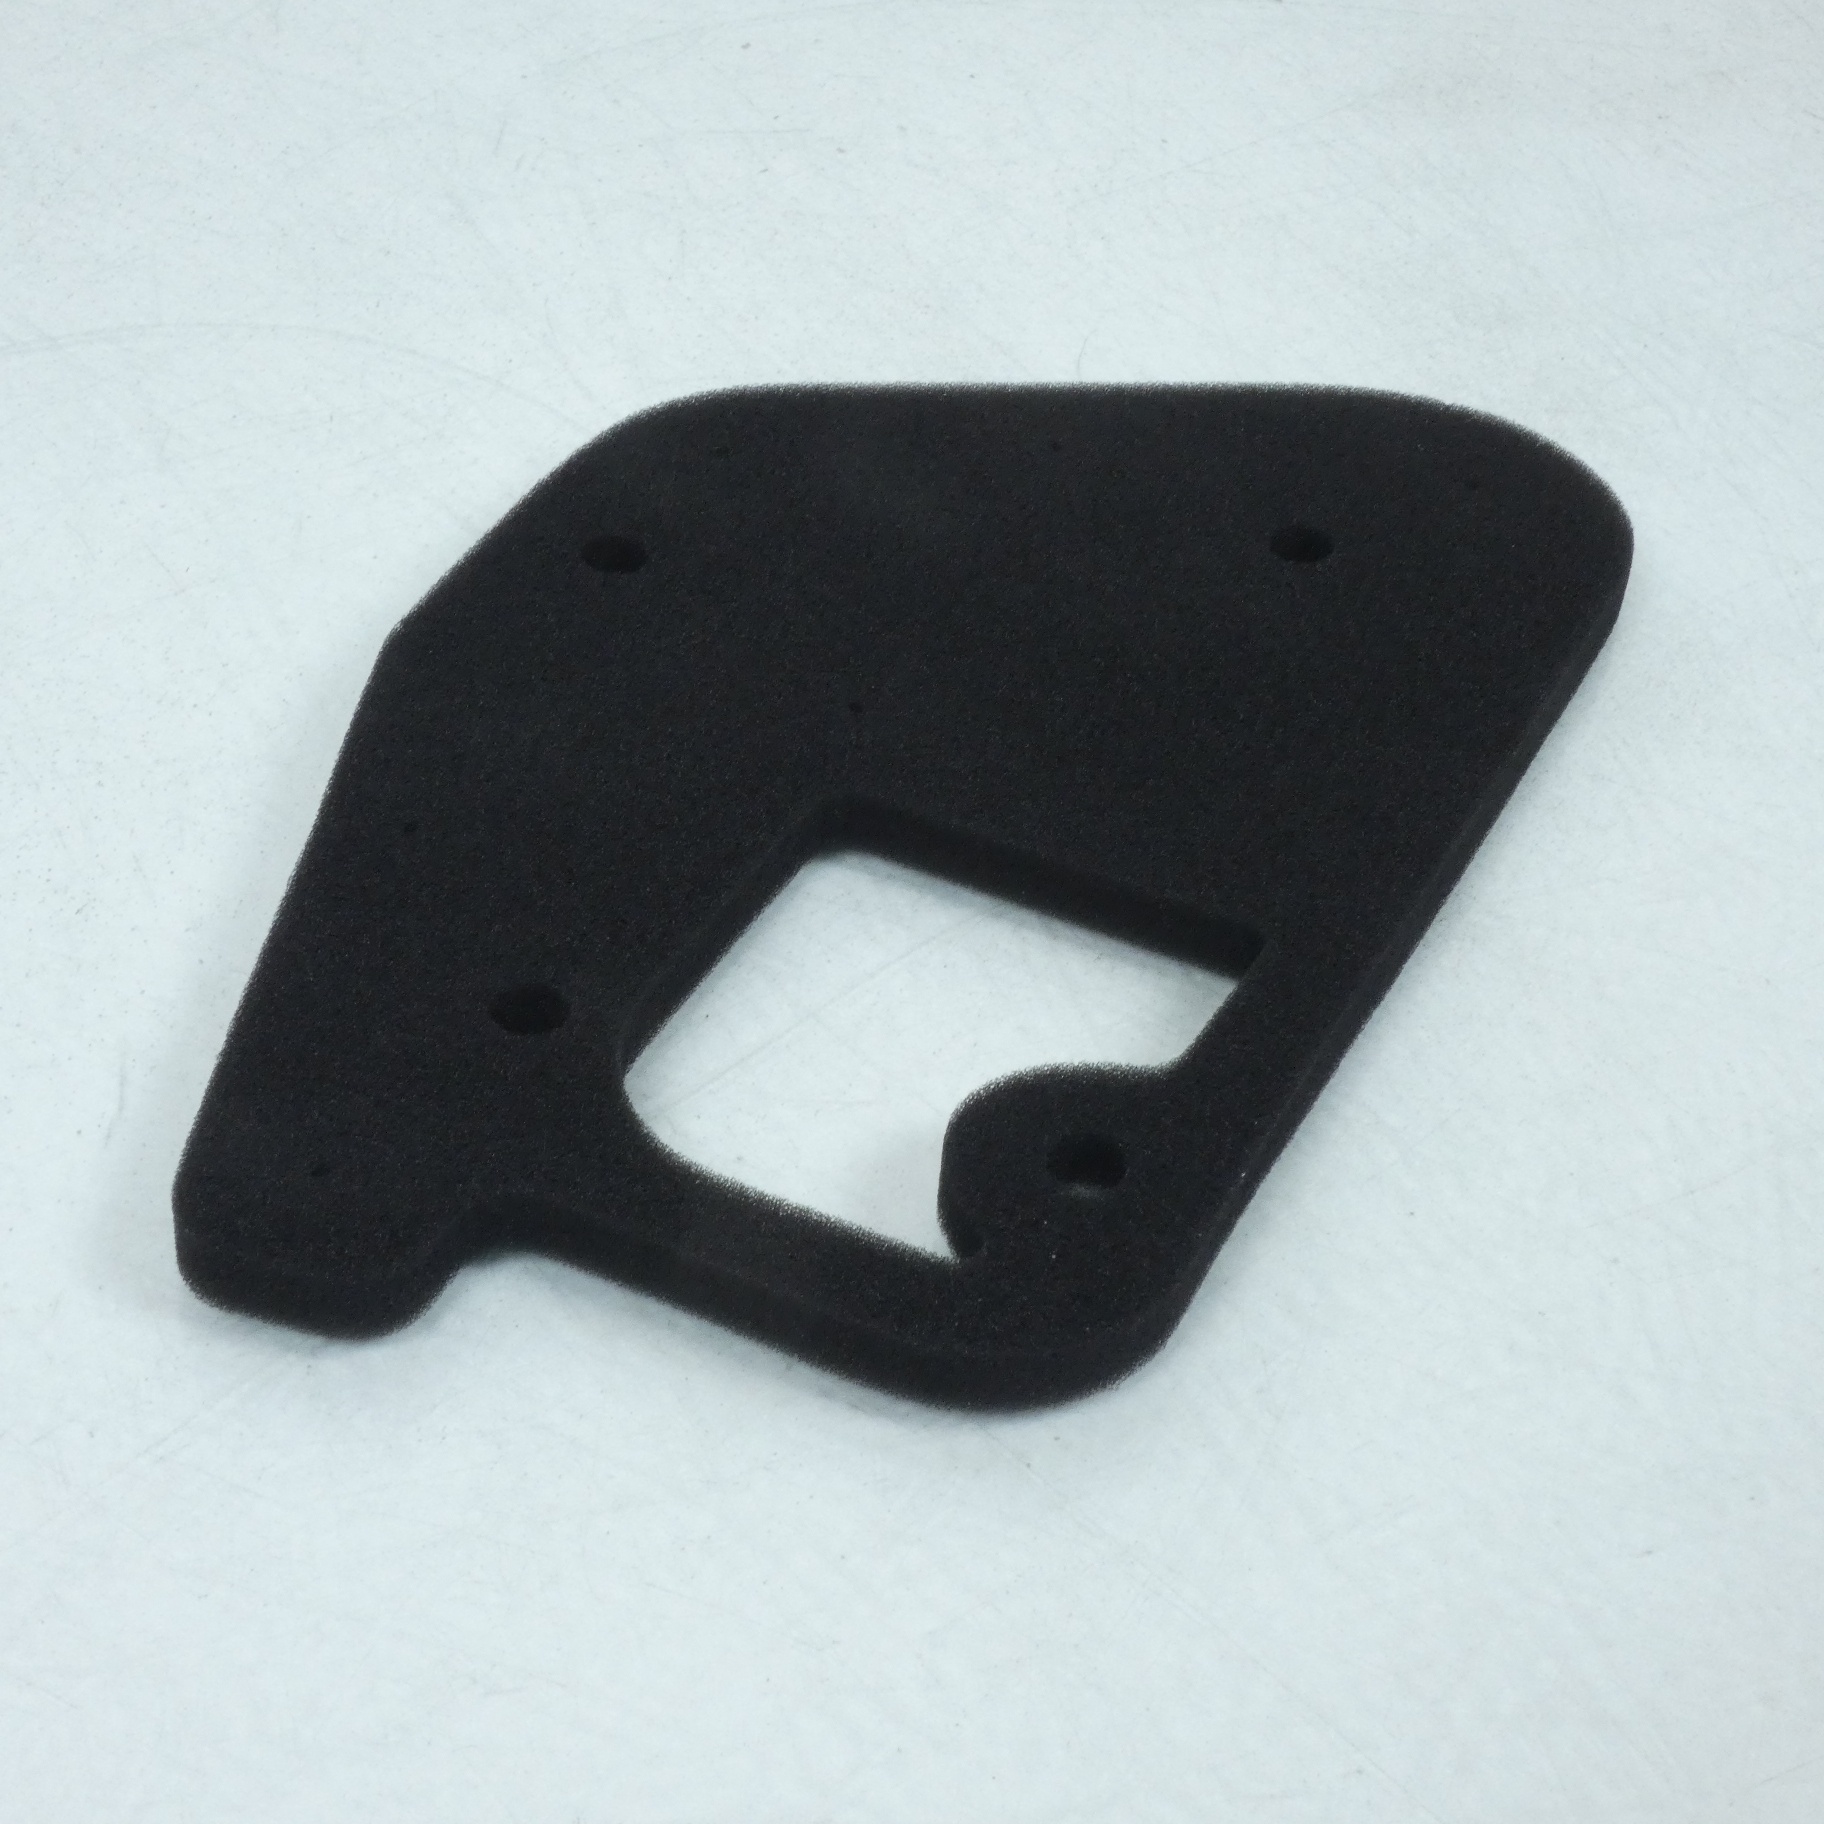 Filtre à air Sifam pour scooter Italjet 50 Scoop 1993 HFA4002 / 3350506 Neuf